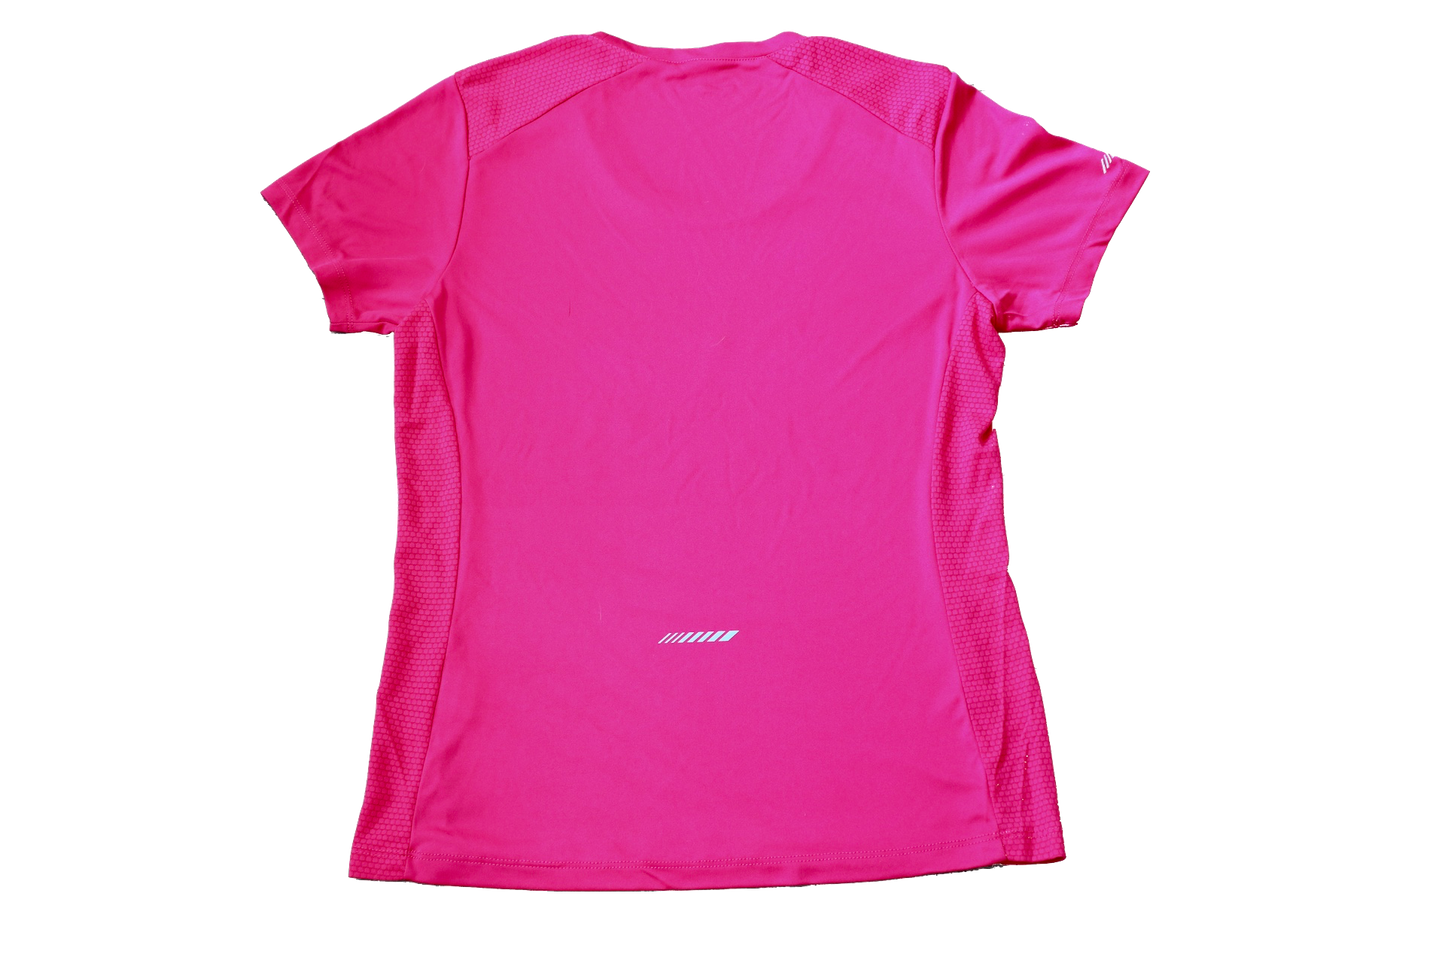 Backside view of the pink Women's MVM Performance Tee.